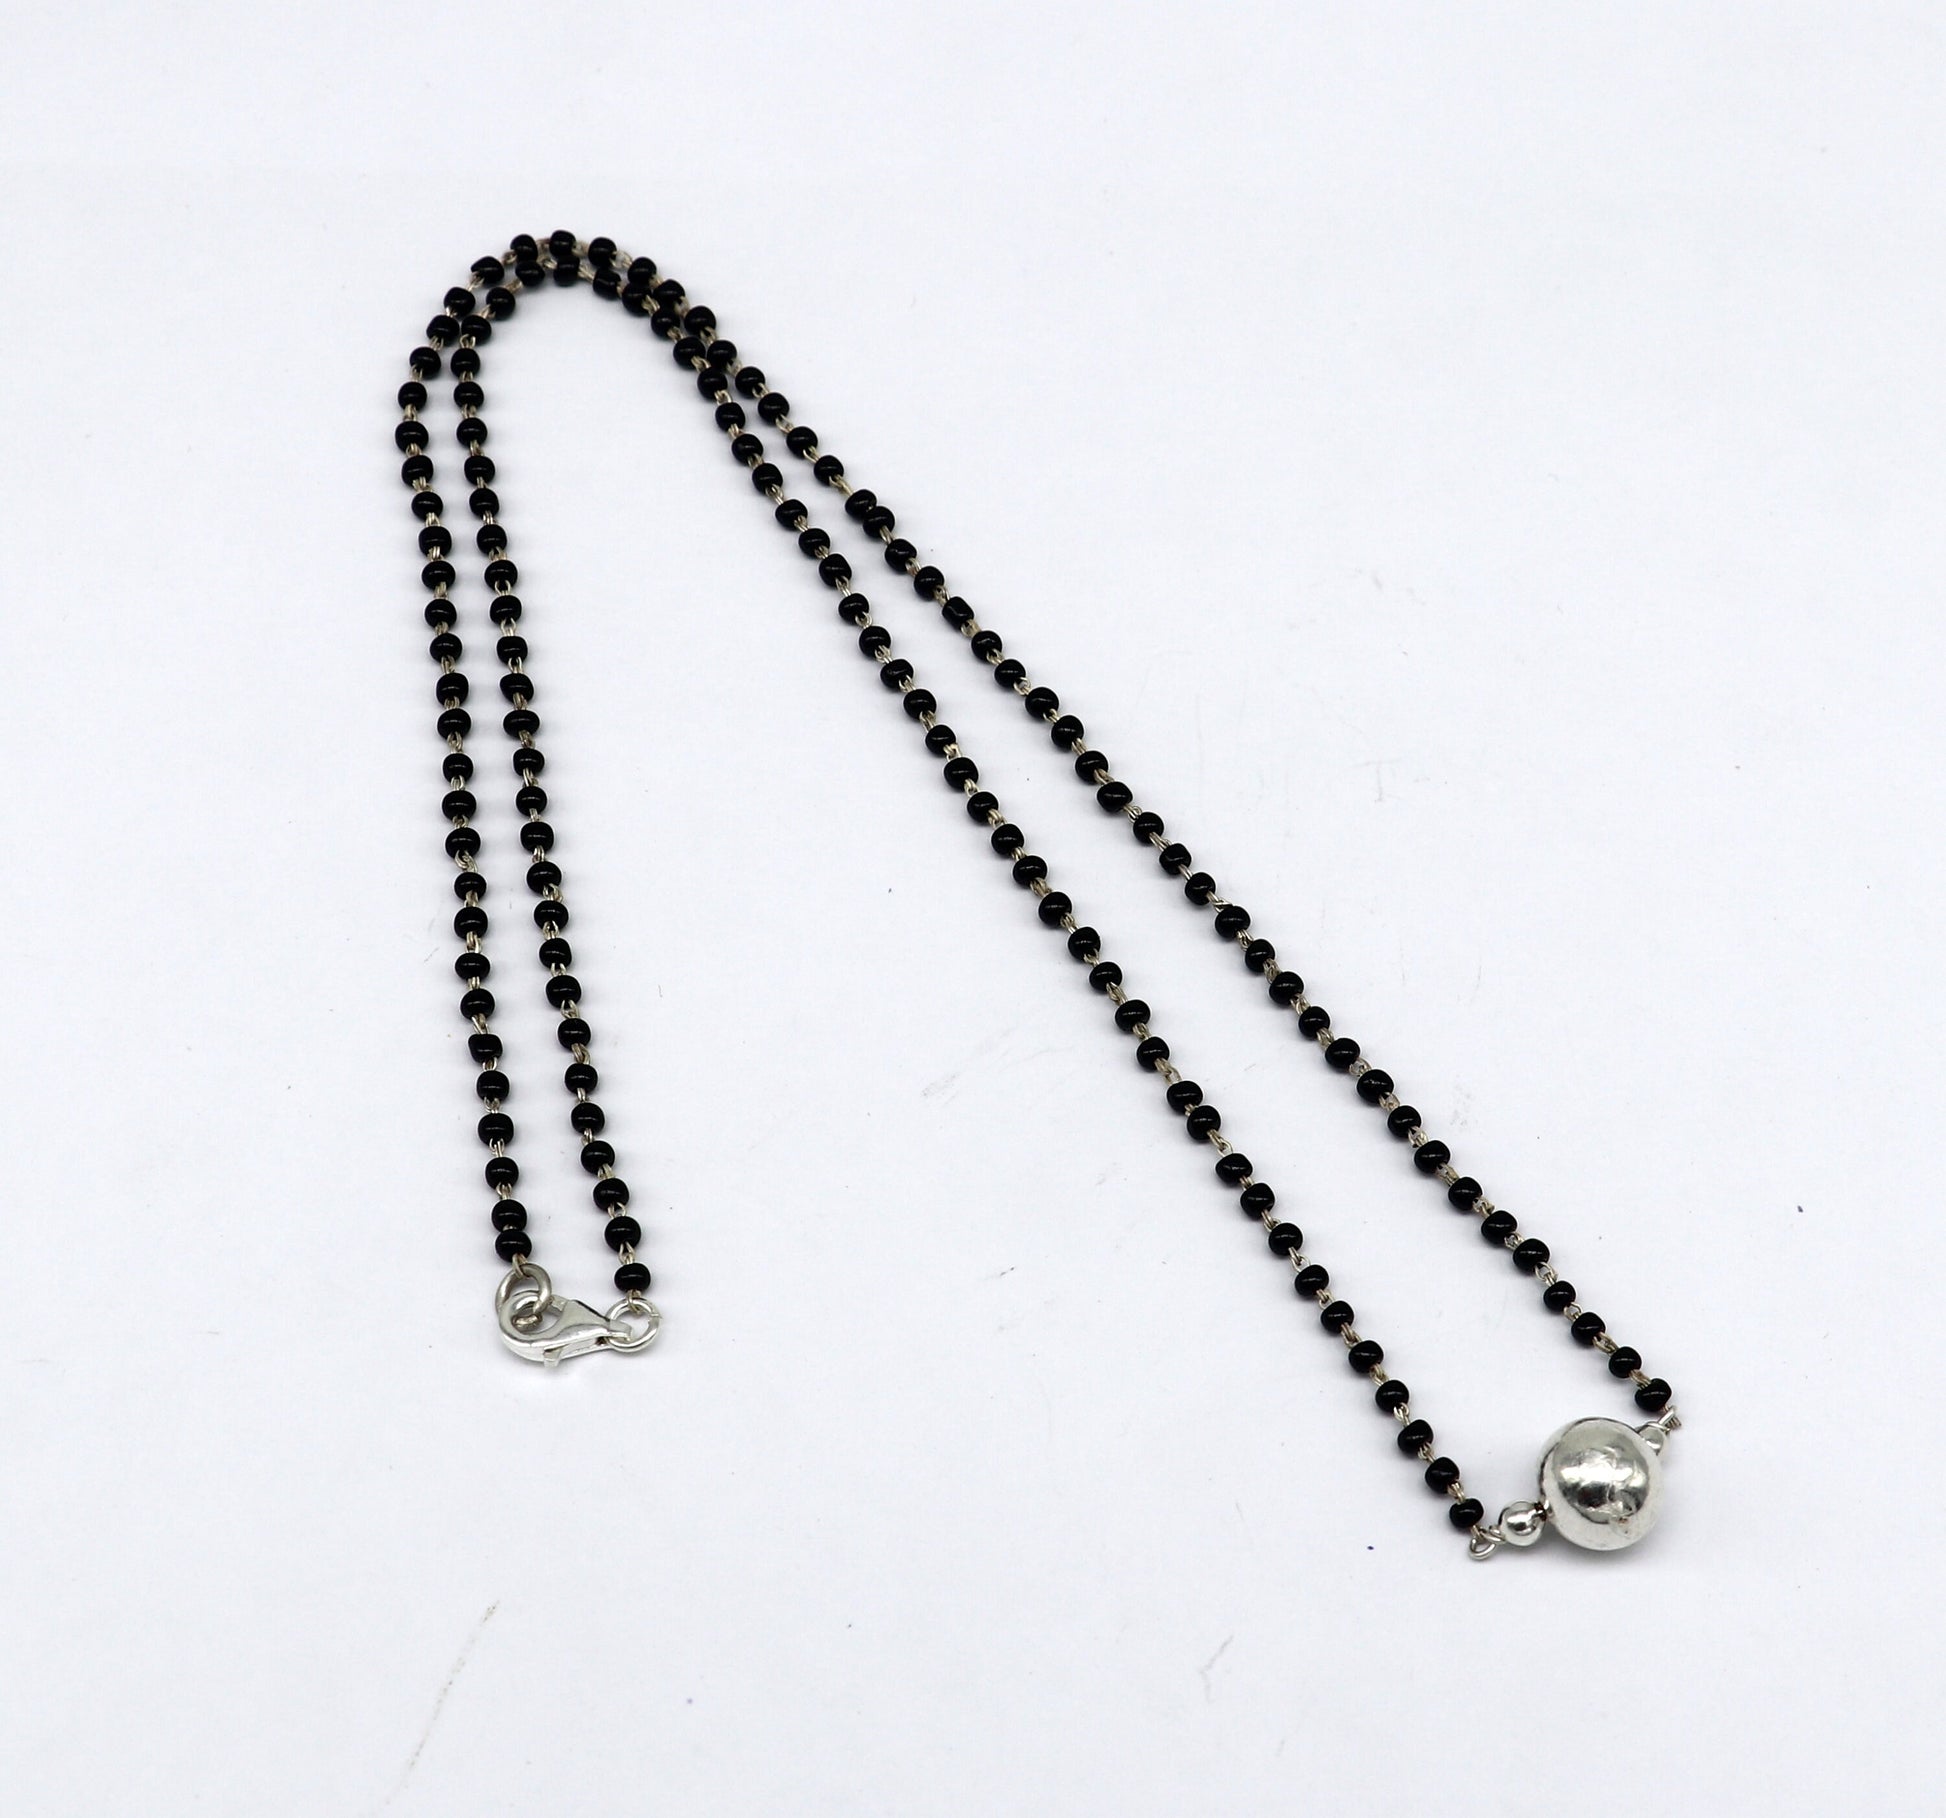 925 sterling silver black beads chain necklace, vintage stylish fancy necklace, traditional style brides Mangalsutra necklace India set219 - TRIBAL ORNAMENTS